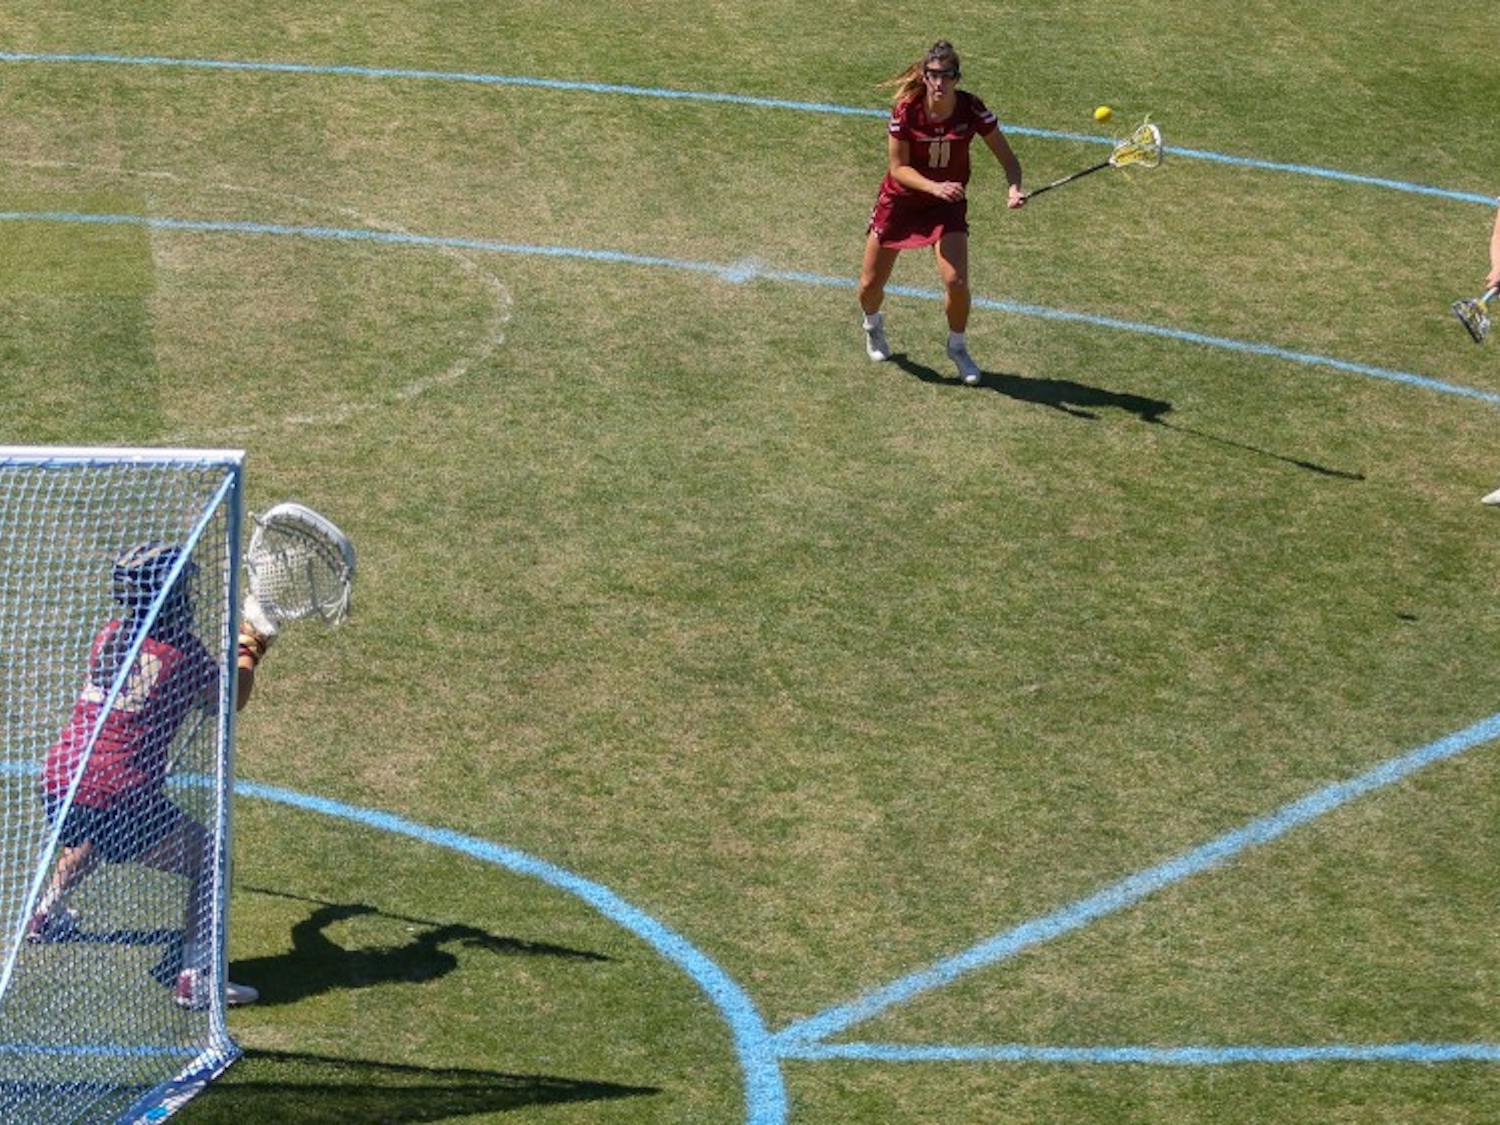 Junior attacker Katie Hoeg (8) makes a shot on goal against Boston College &nbsp;at the UNC Lacrosse Stadium on Saturday, March 23, 2019. Boston College defeated UNC 14-8.&nbsp;